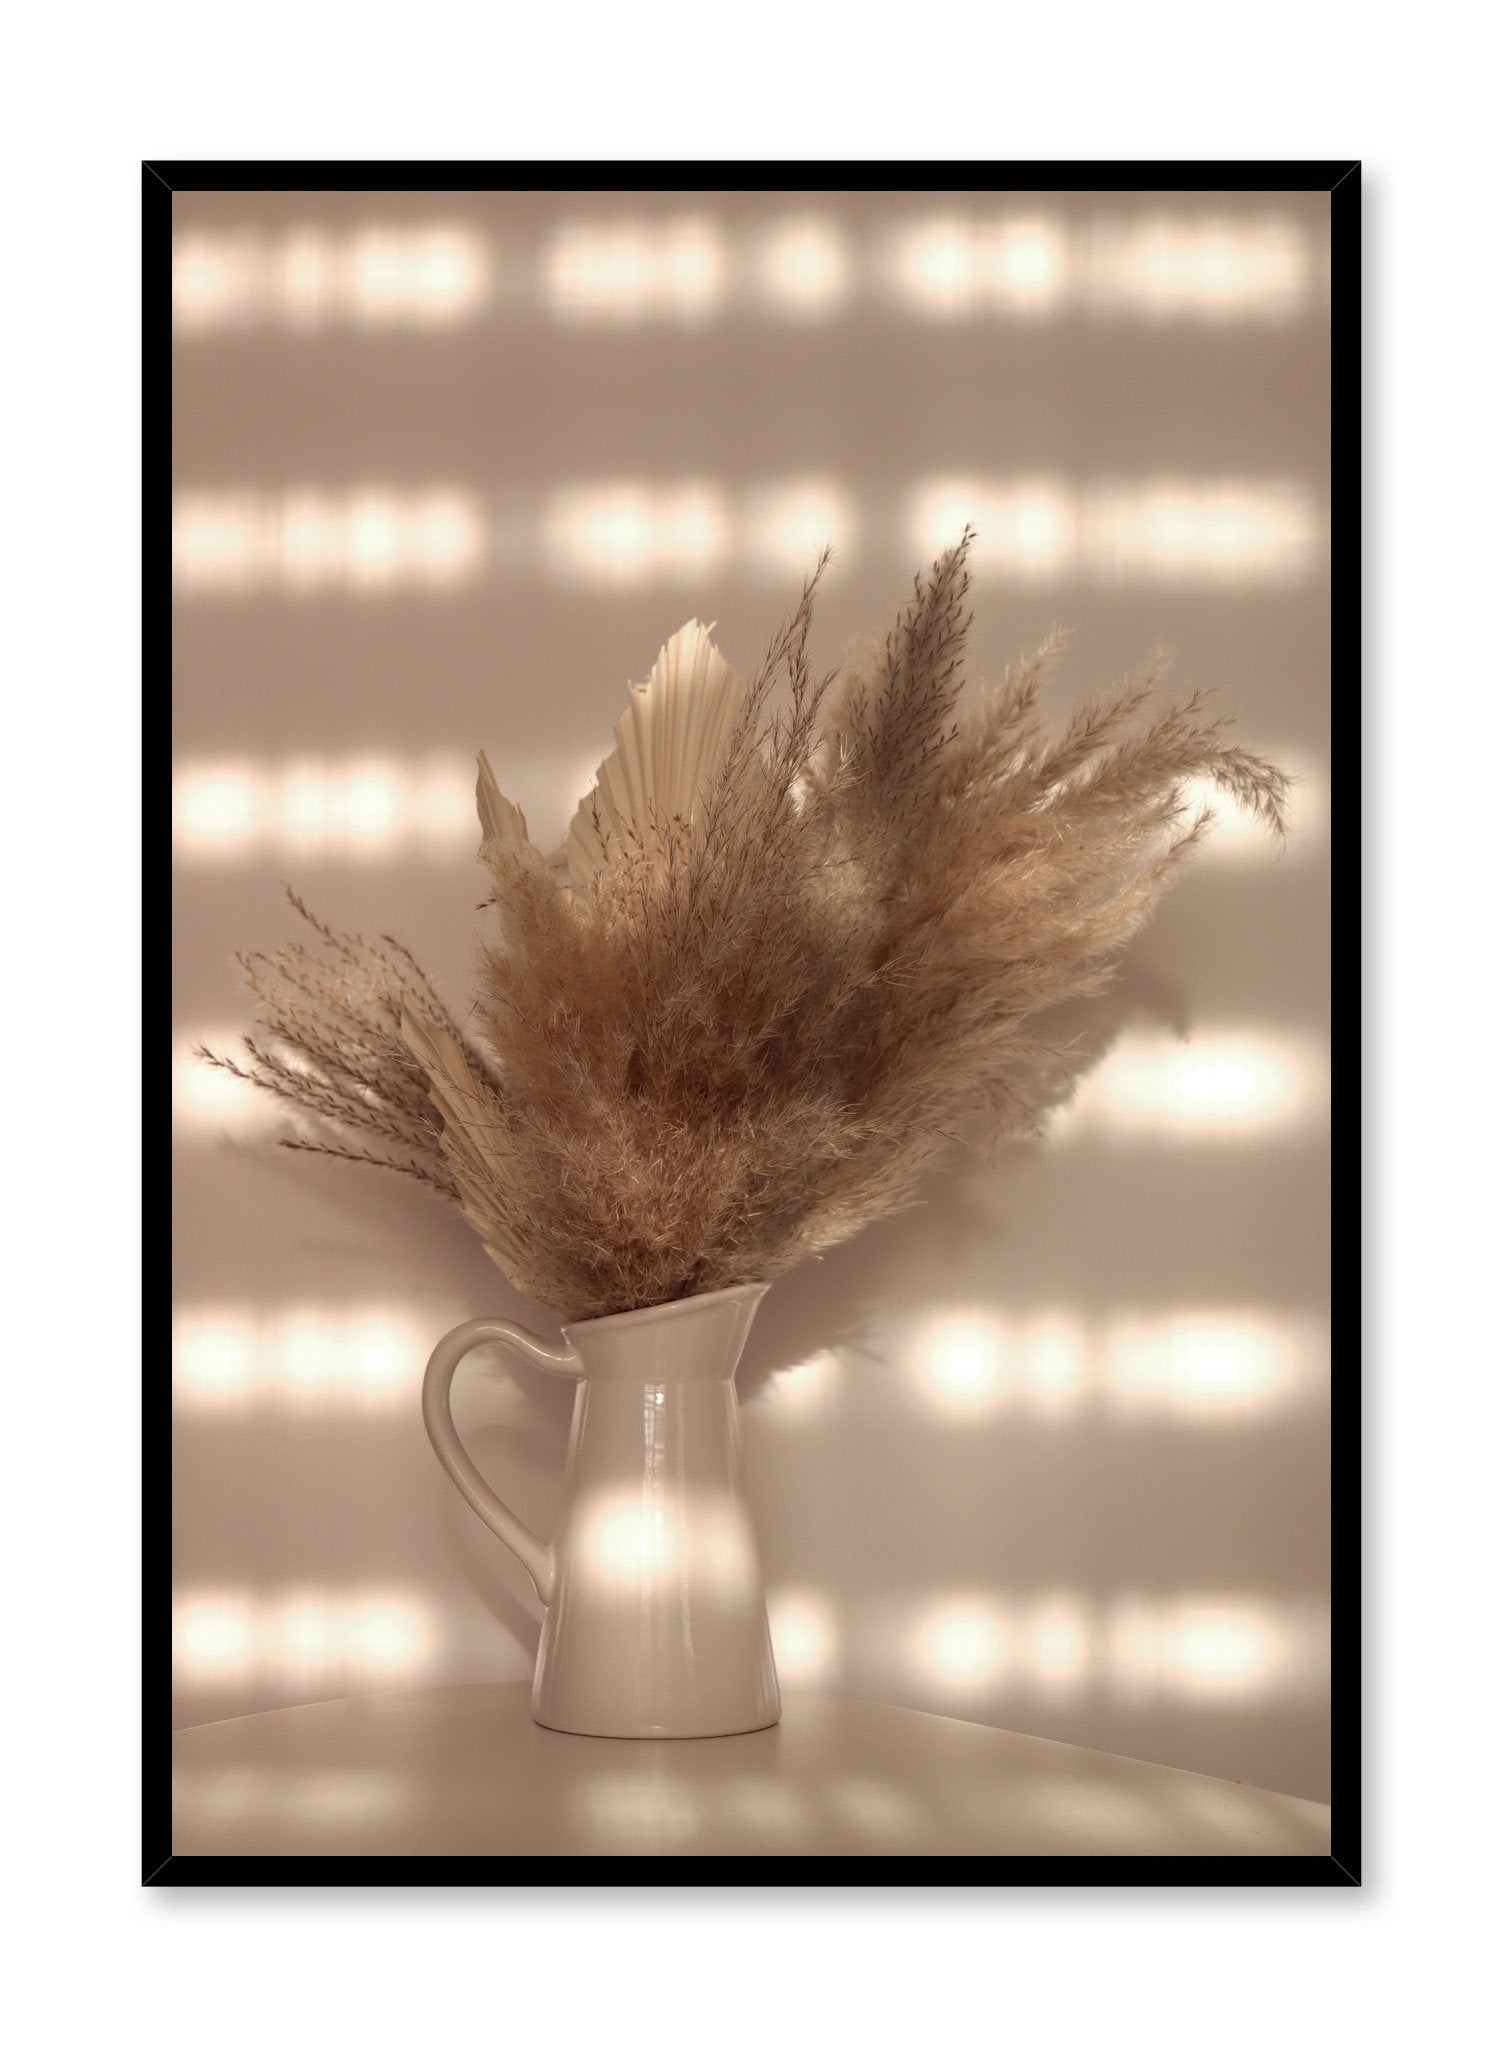 "Radiant Arrangement" is a botanical photography poster by Opposite Wall of a golden dried pampas bouquet in a white vase bathed in sunlight.